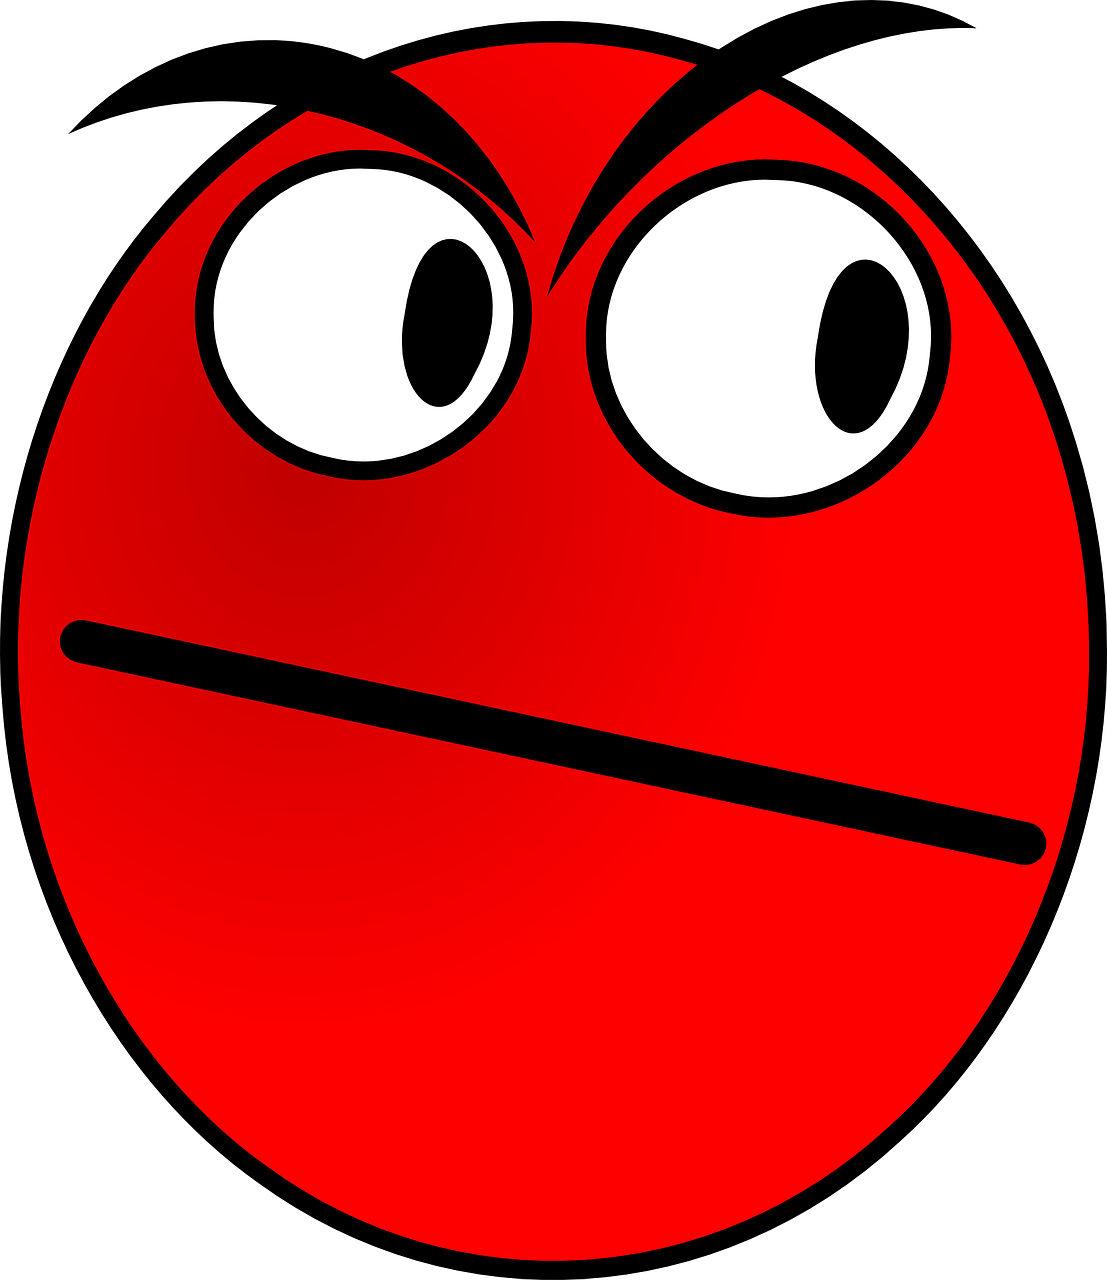 angry smiley face icon free photo